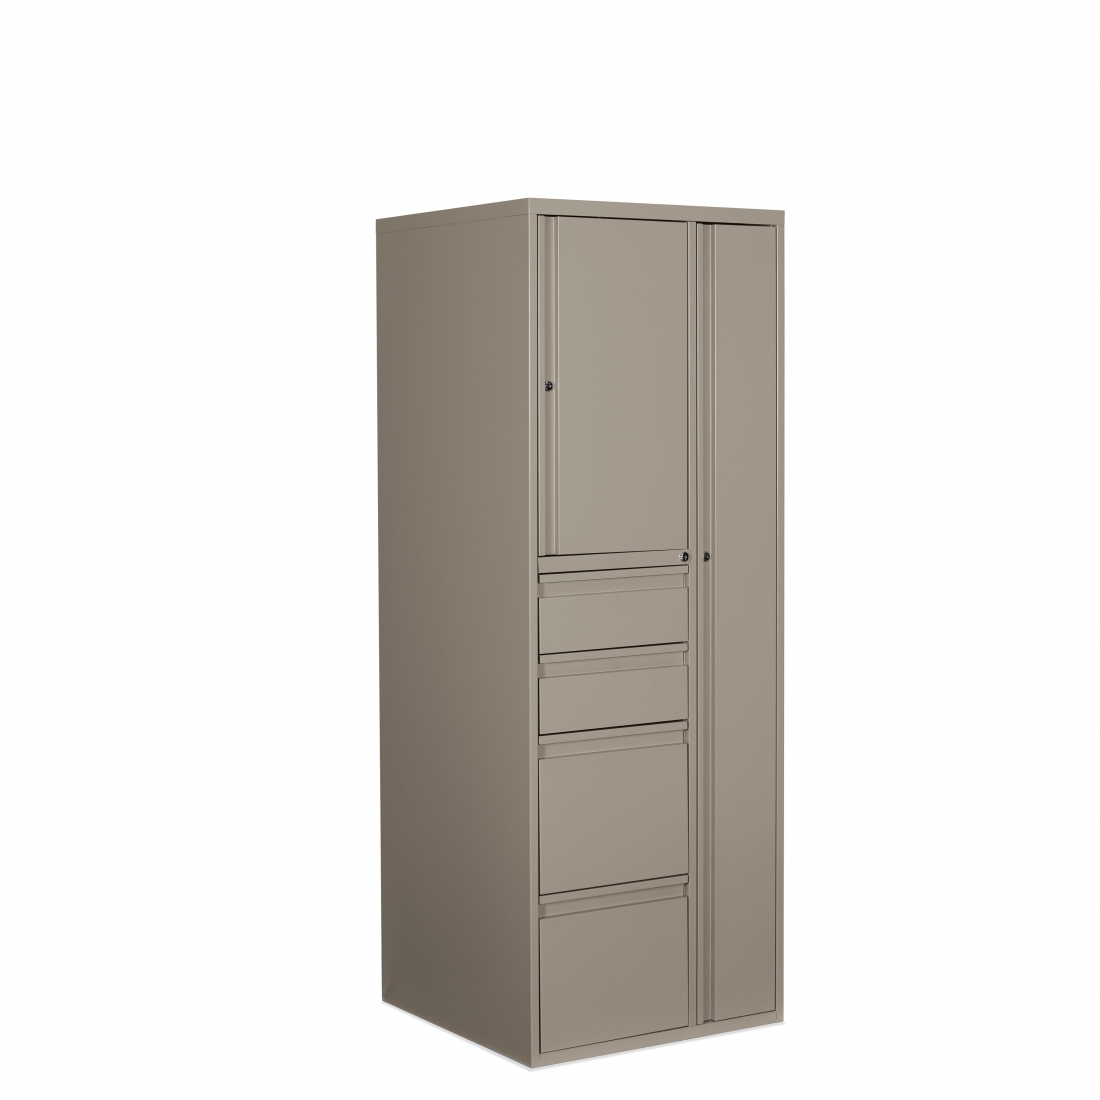 Personal Tower, Wardrobe - Right, Two Box, Two File - Left